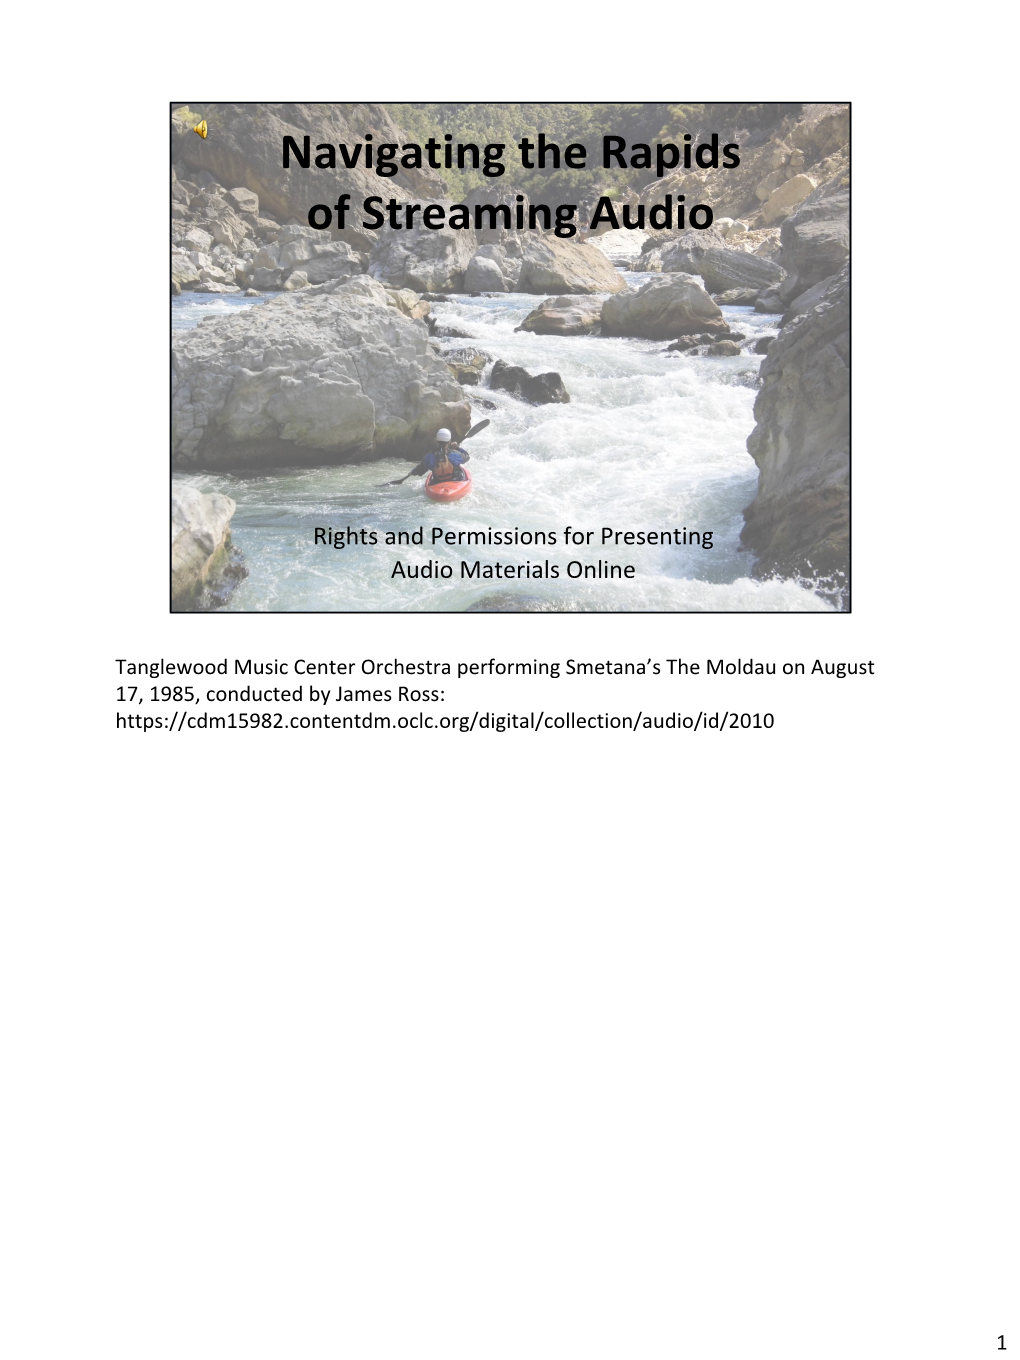 Navigating the Rapids of Streaming Audio